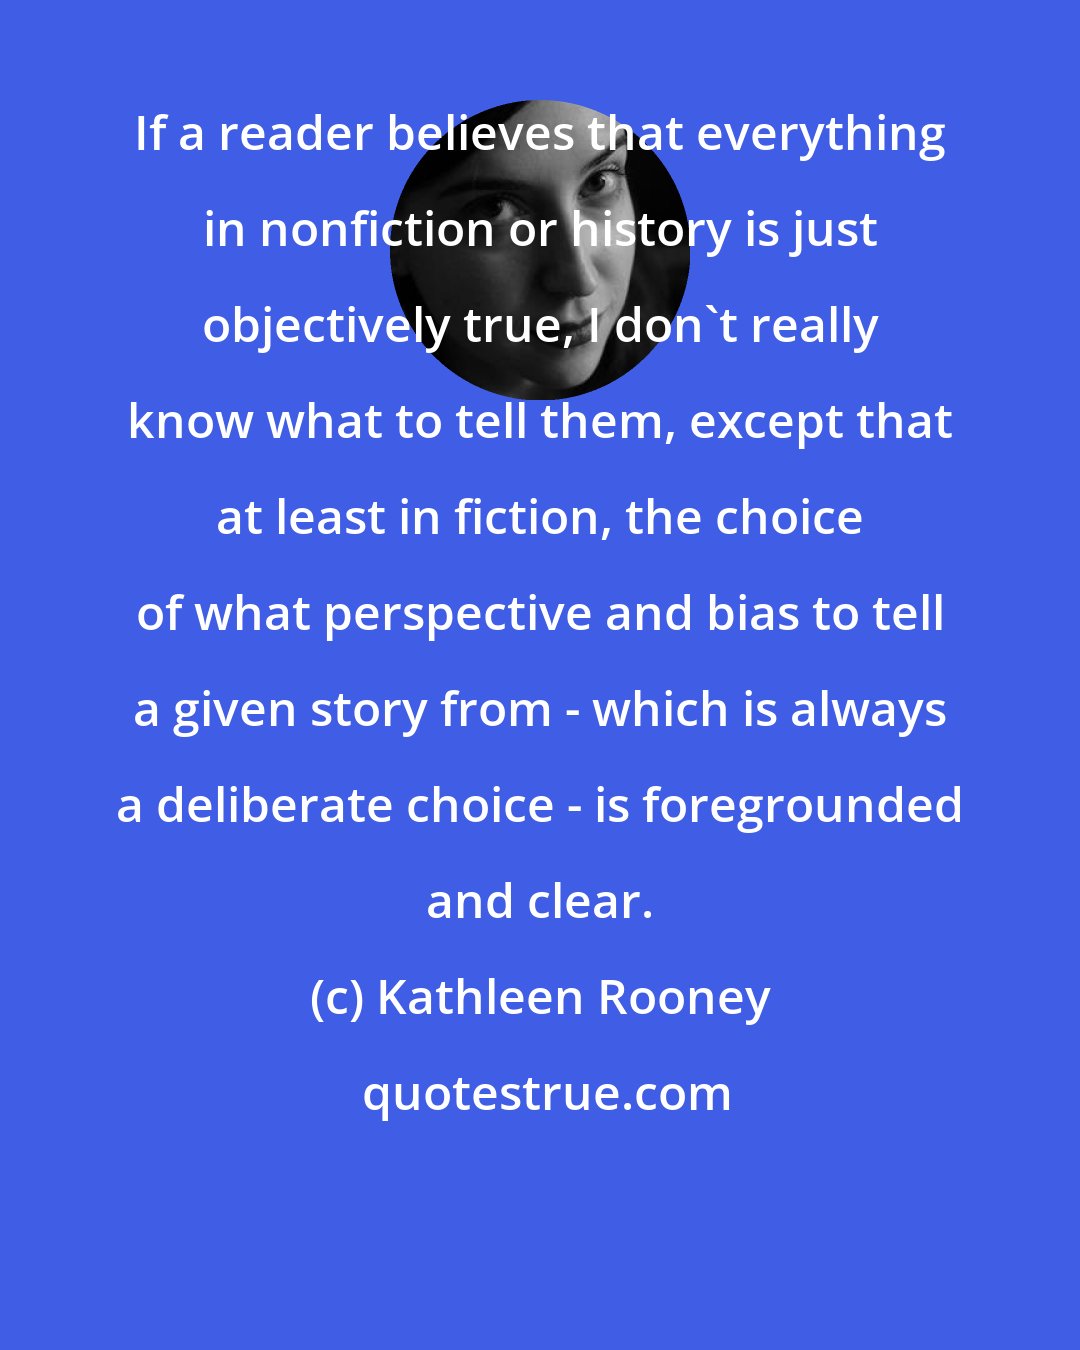 Kathleen Rooney: If a reader believes that everything in nonfiction or history is just objectively true, I don't really know what to tell them, except that at least in fiction, the choice of what perspective and bias to tell a given story from - which is always a deliberate choice - is foregrounded and clear.